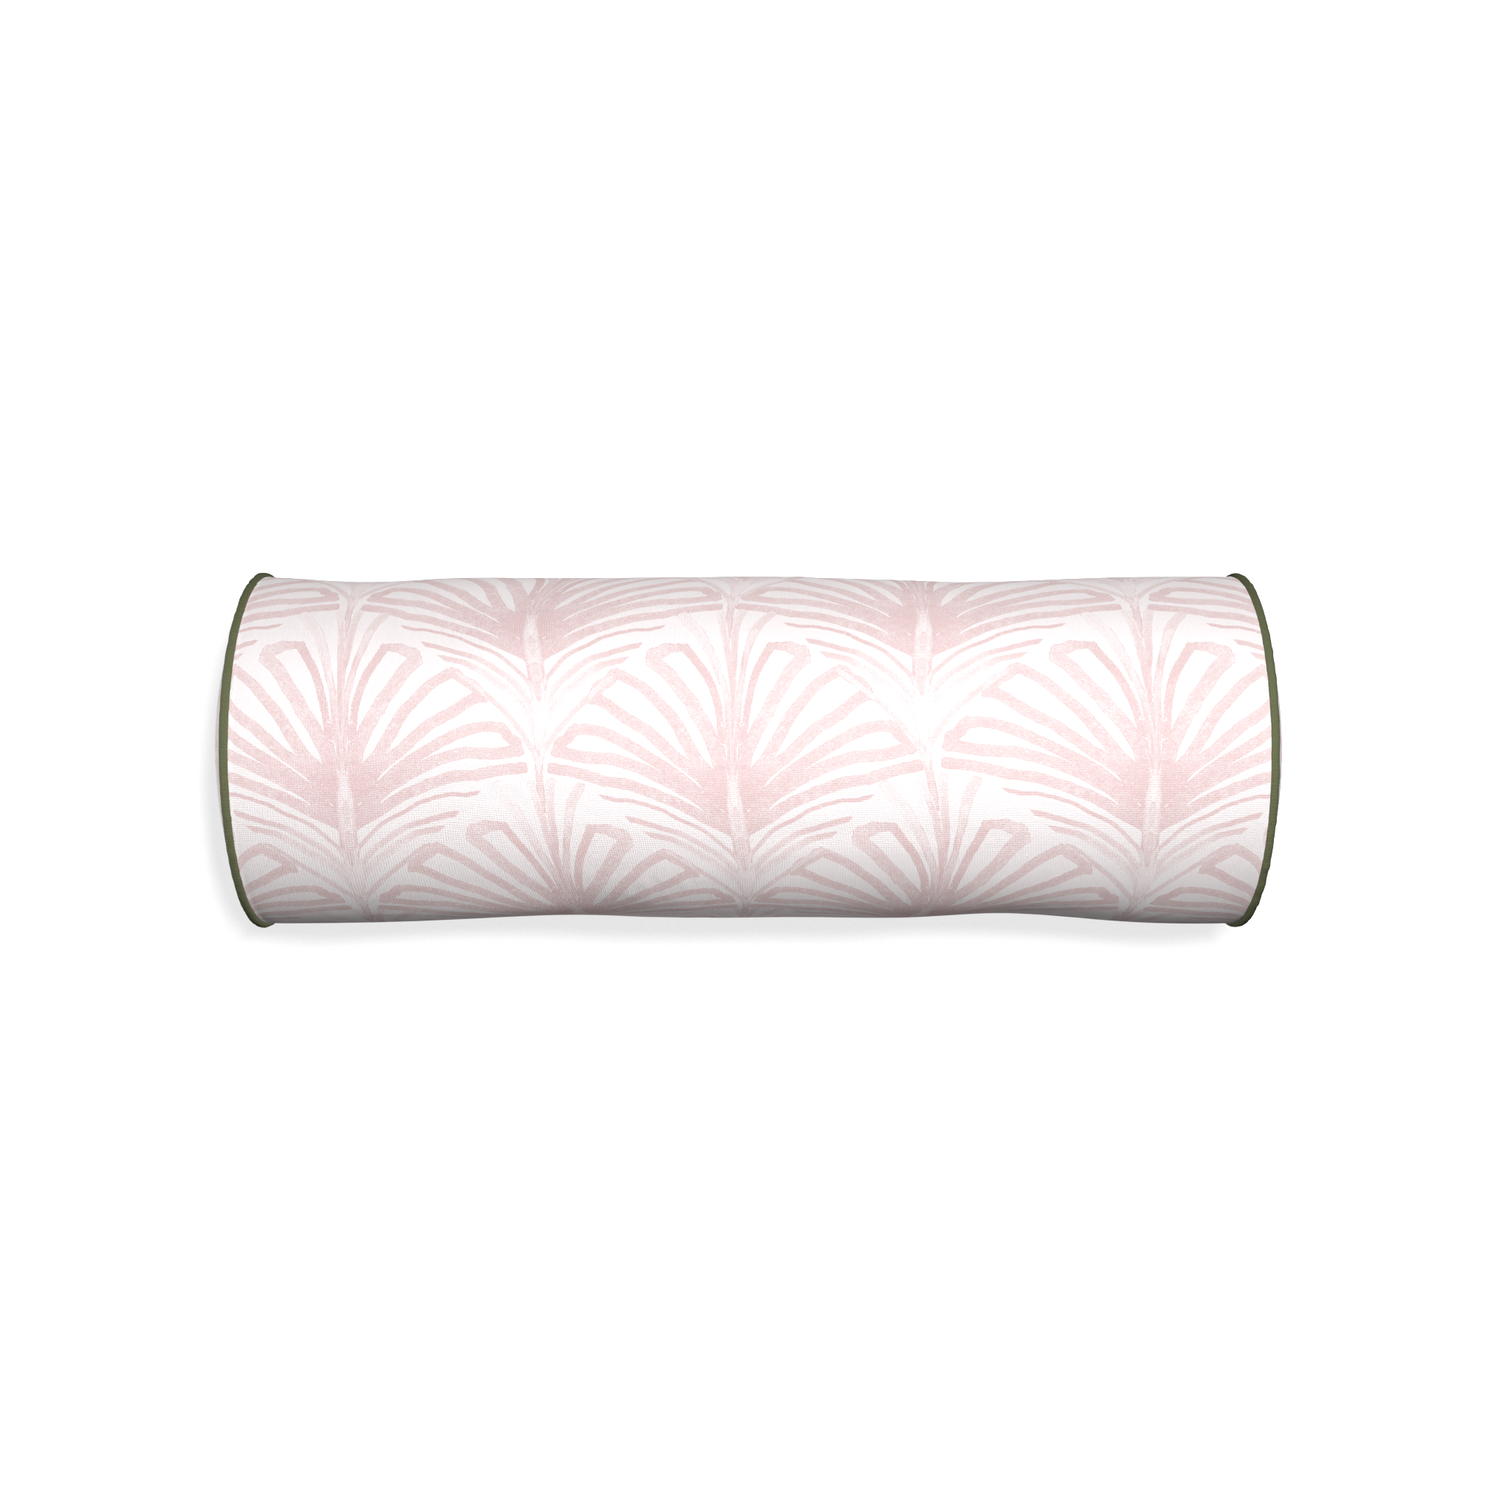 Bolster suzy rose custom pillow with f piping on white background